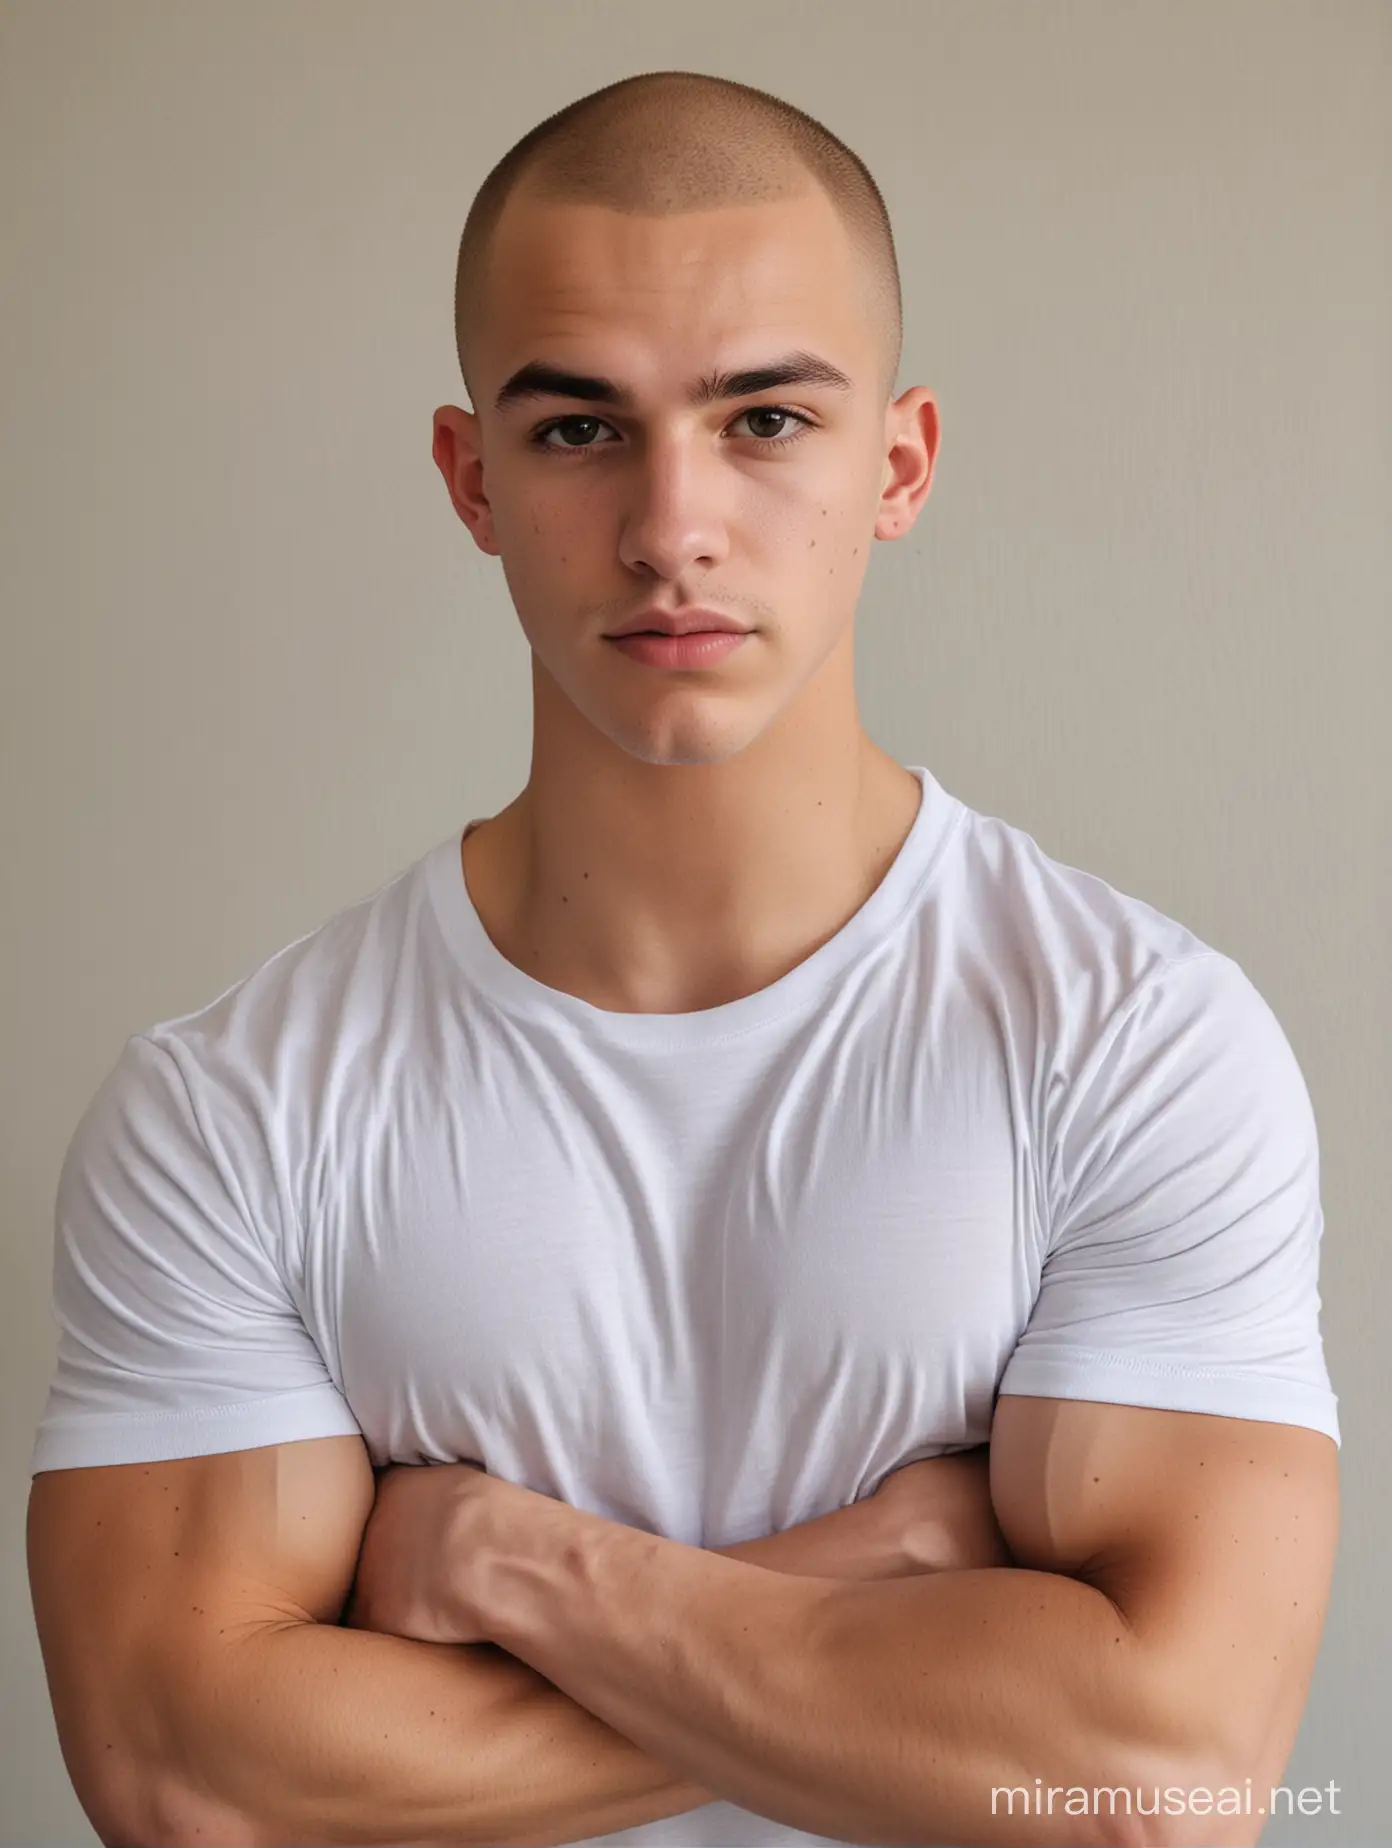 Teenage Boy with Muscular Physique in Casual White Tee